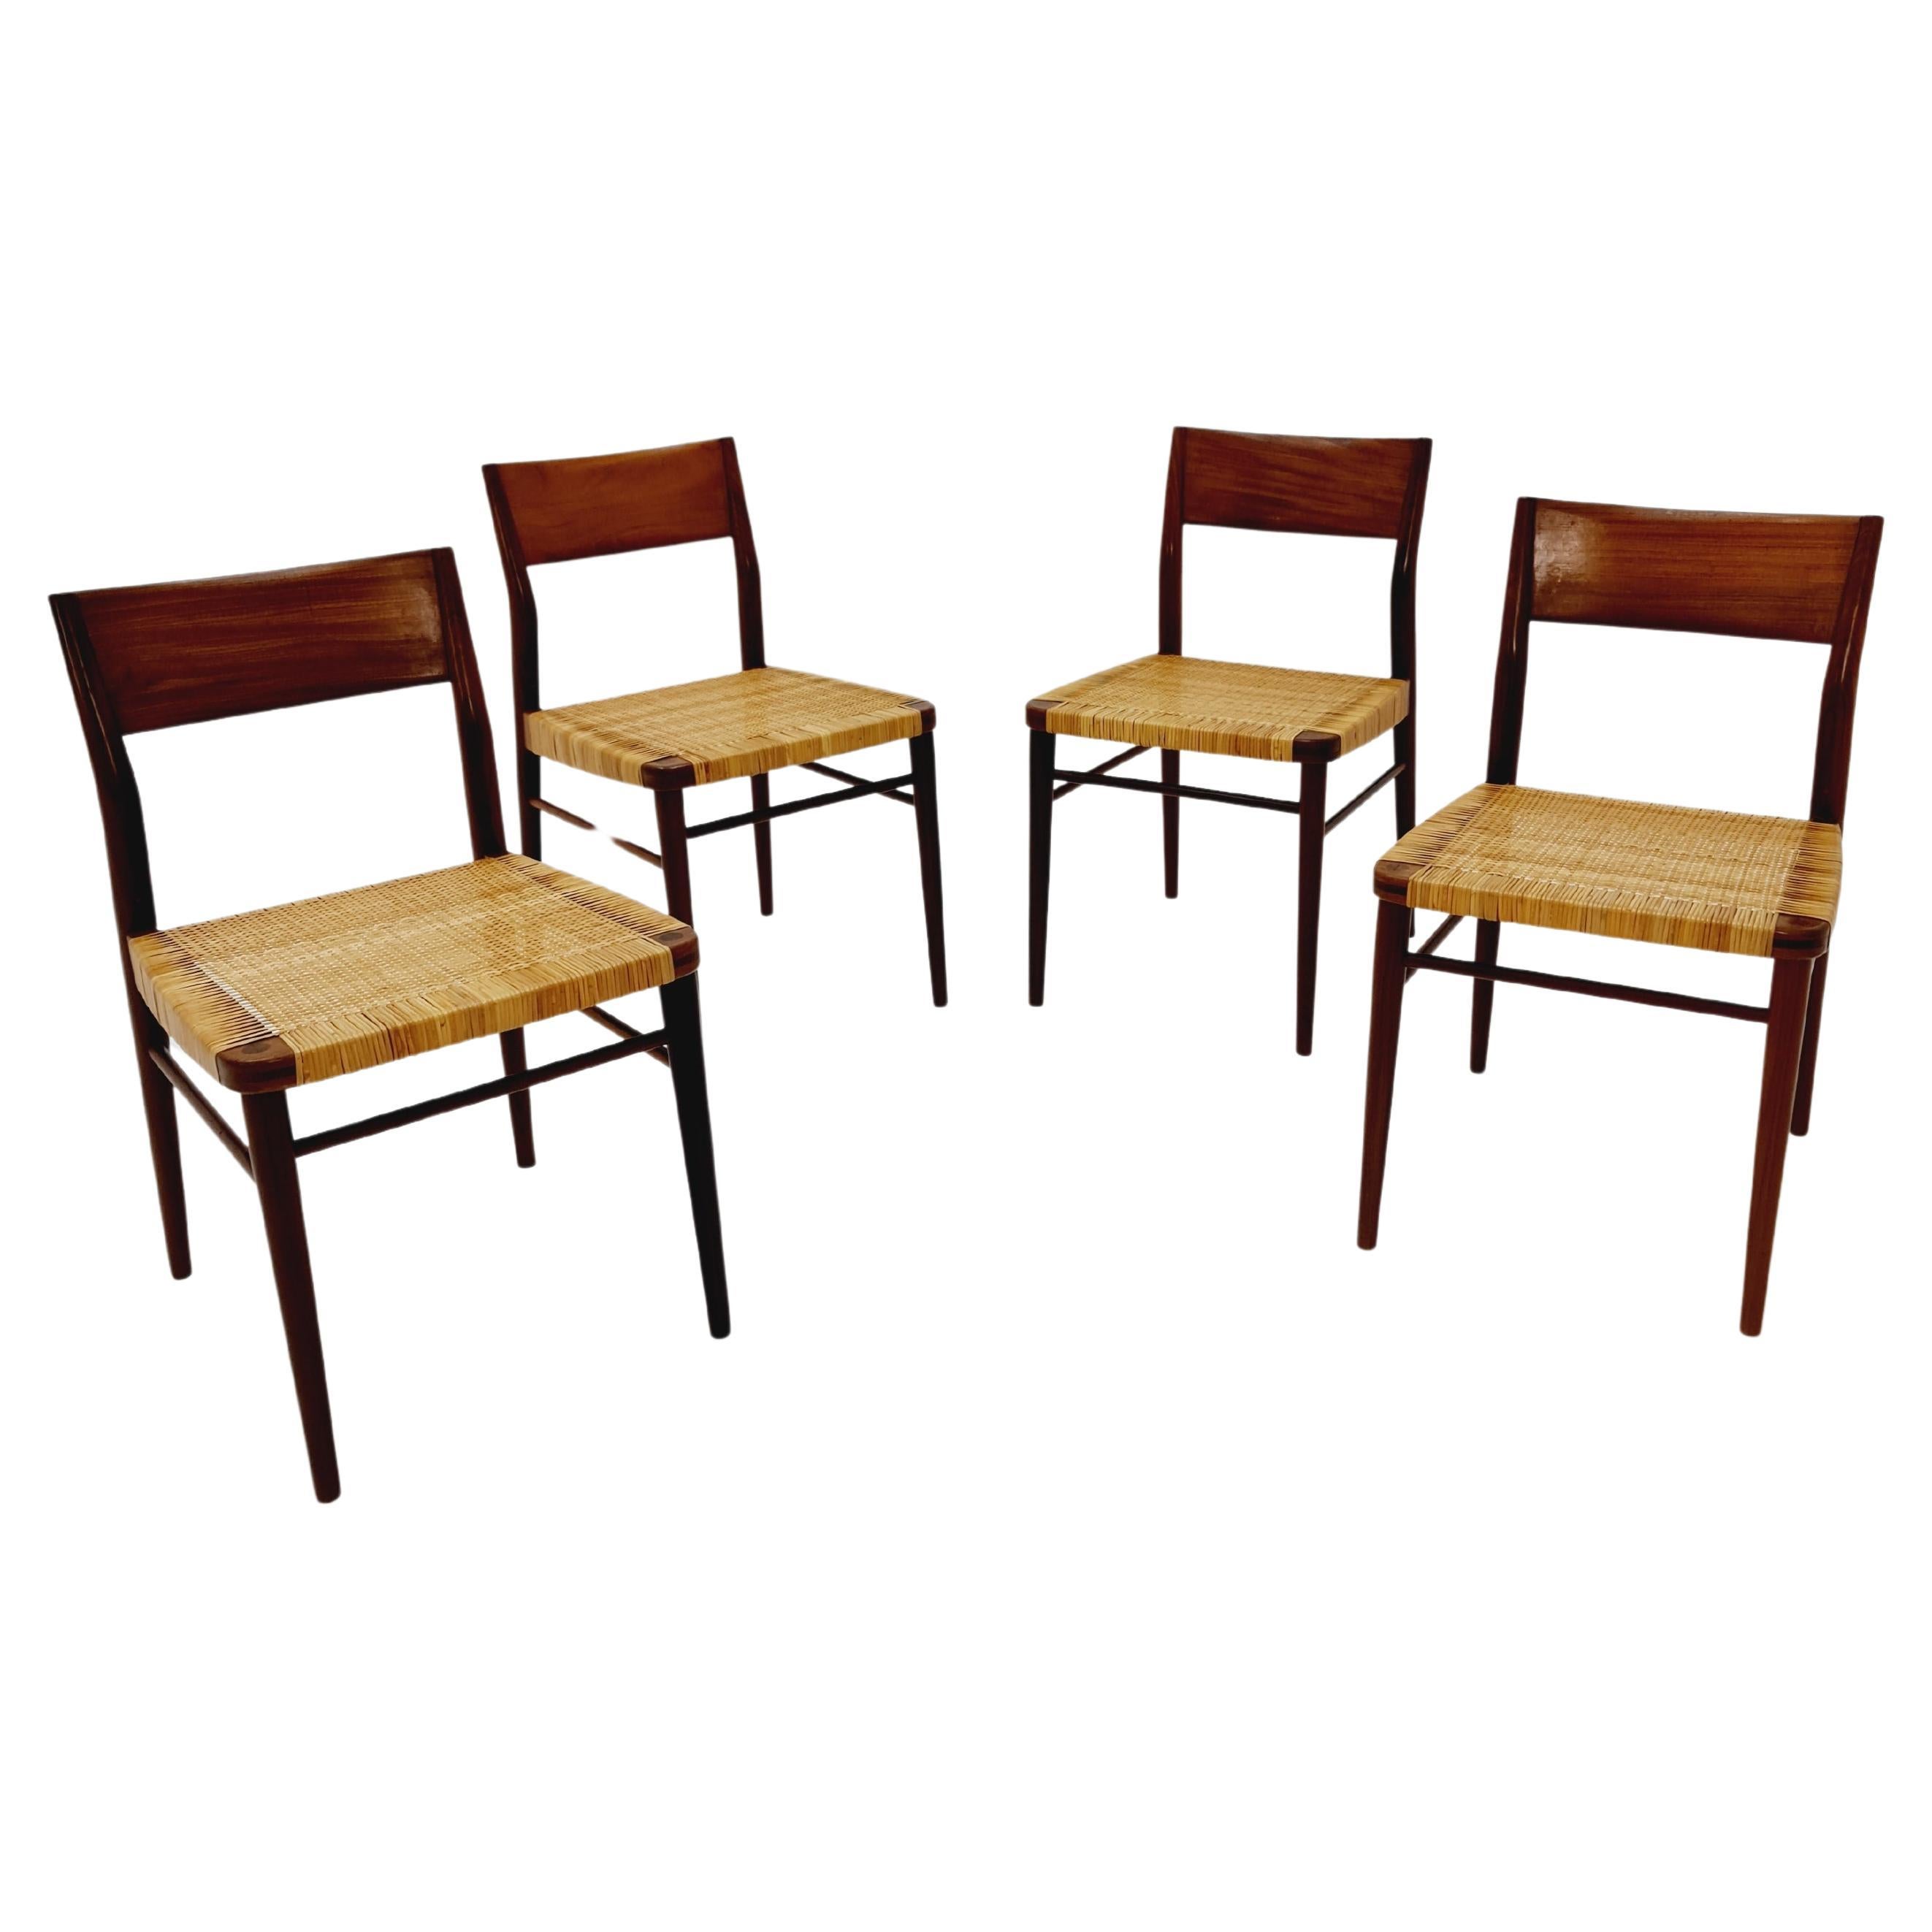 4 Mid Century German teak and rattan chairs by Georg Leowald for Wilkhahn